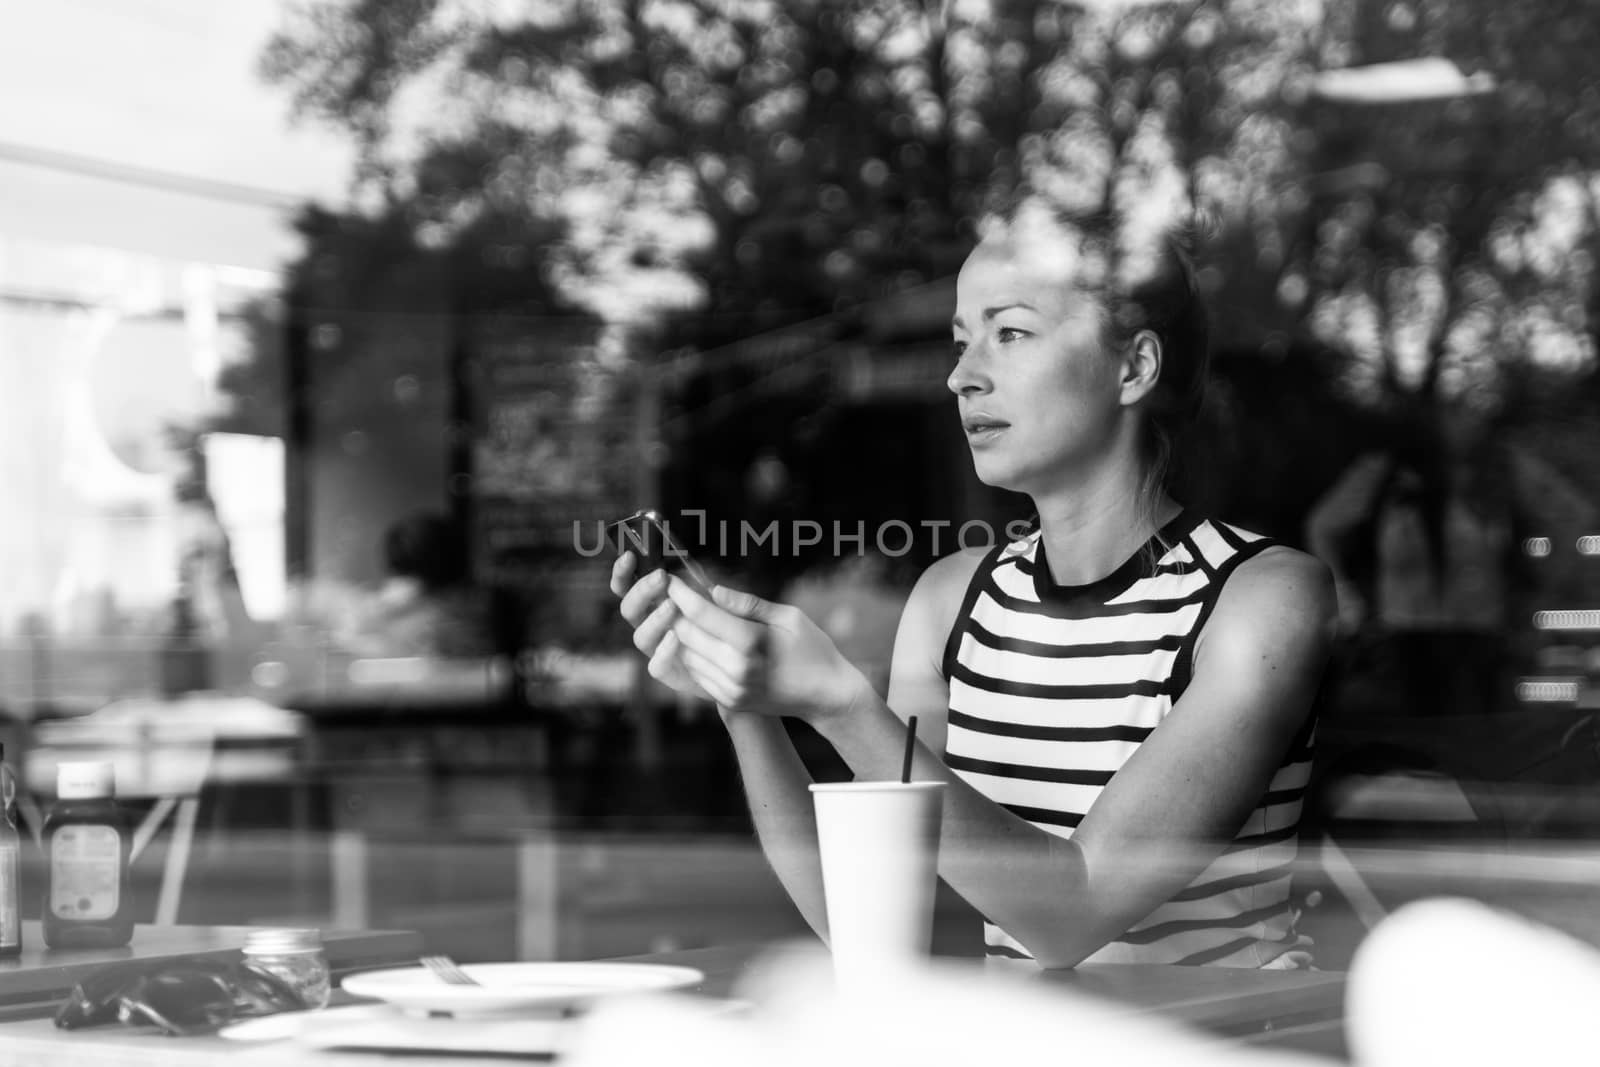 Thoughtful caucasian woman holding mobile phone while looking through the coffee shop window during coffee break. Street reflections in the window glass. Black and white image.